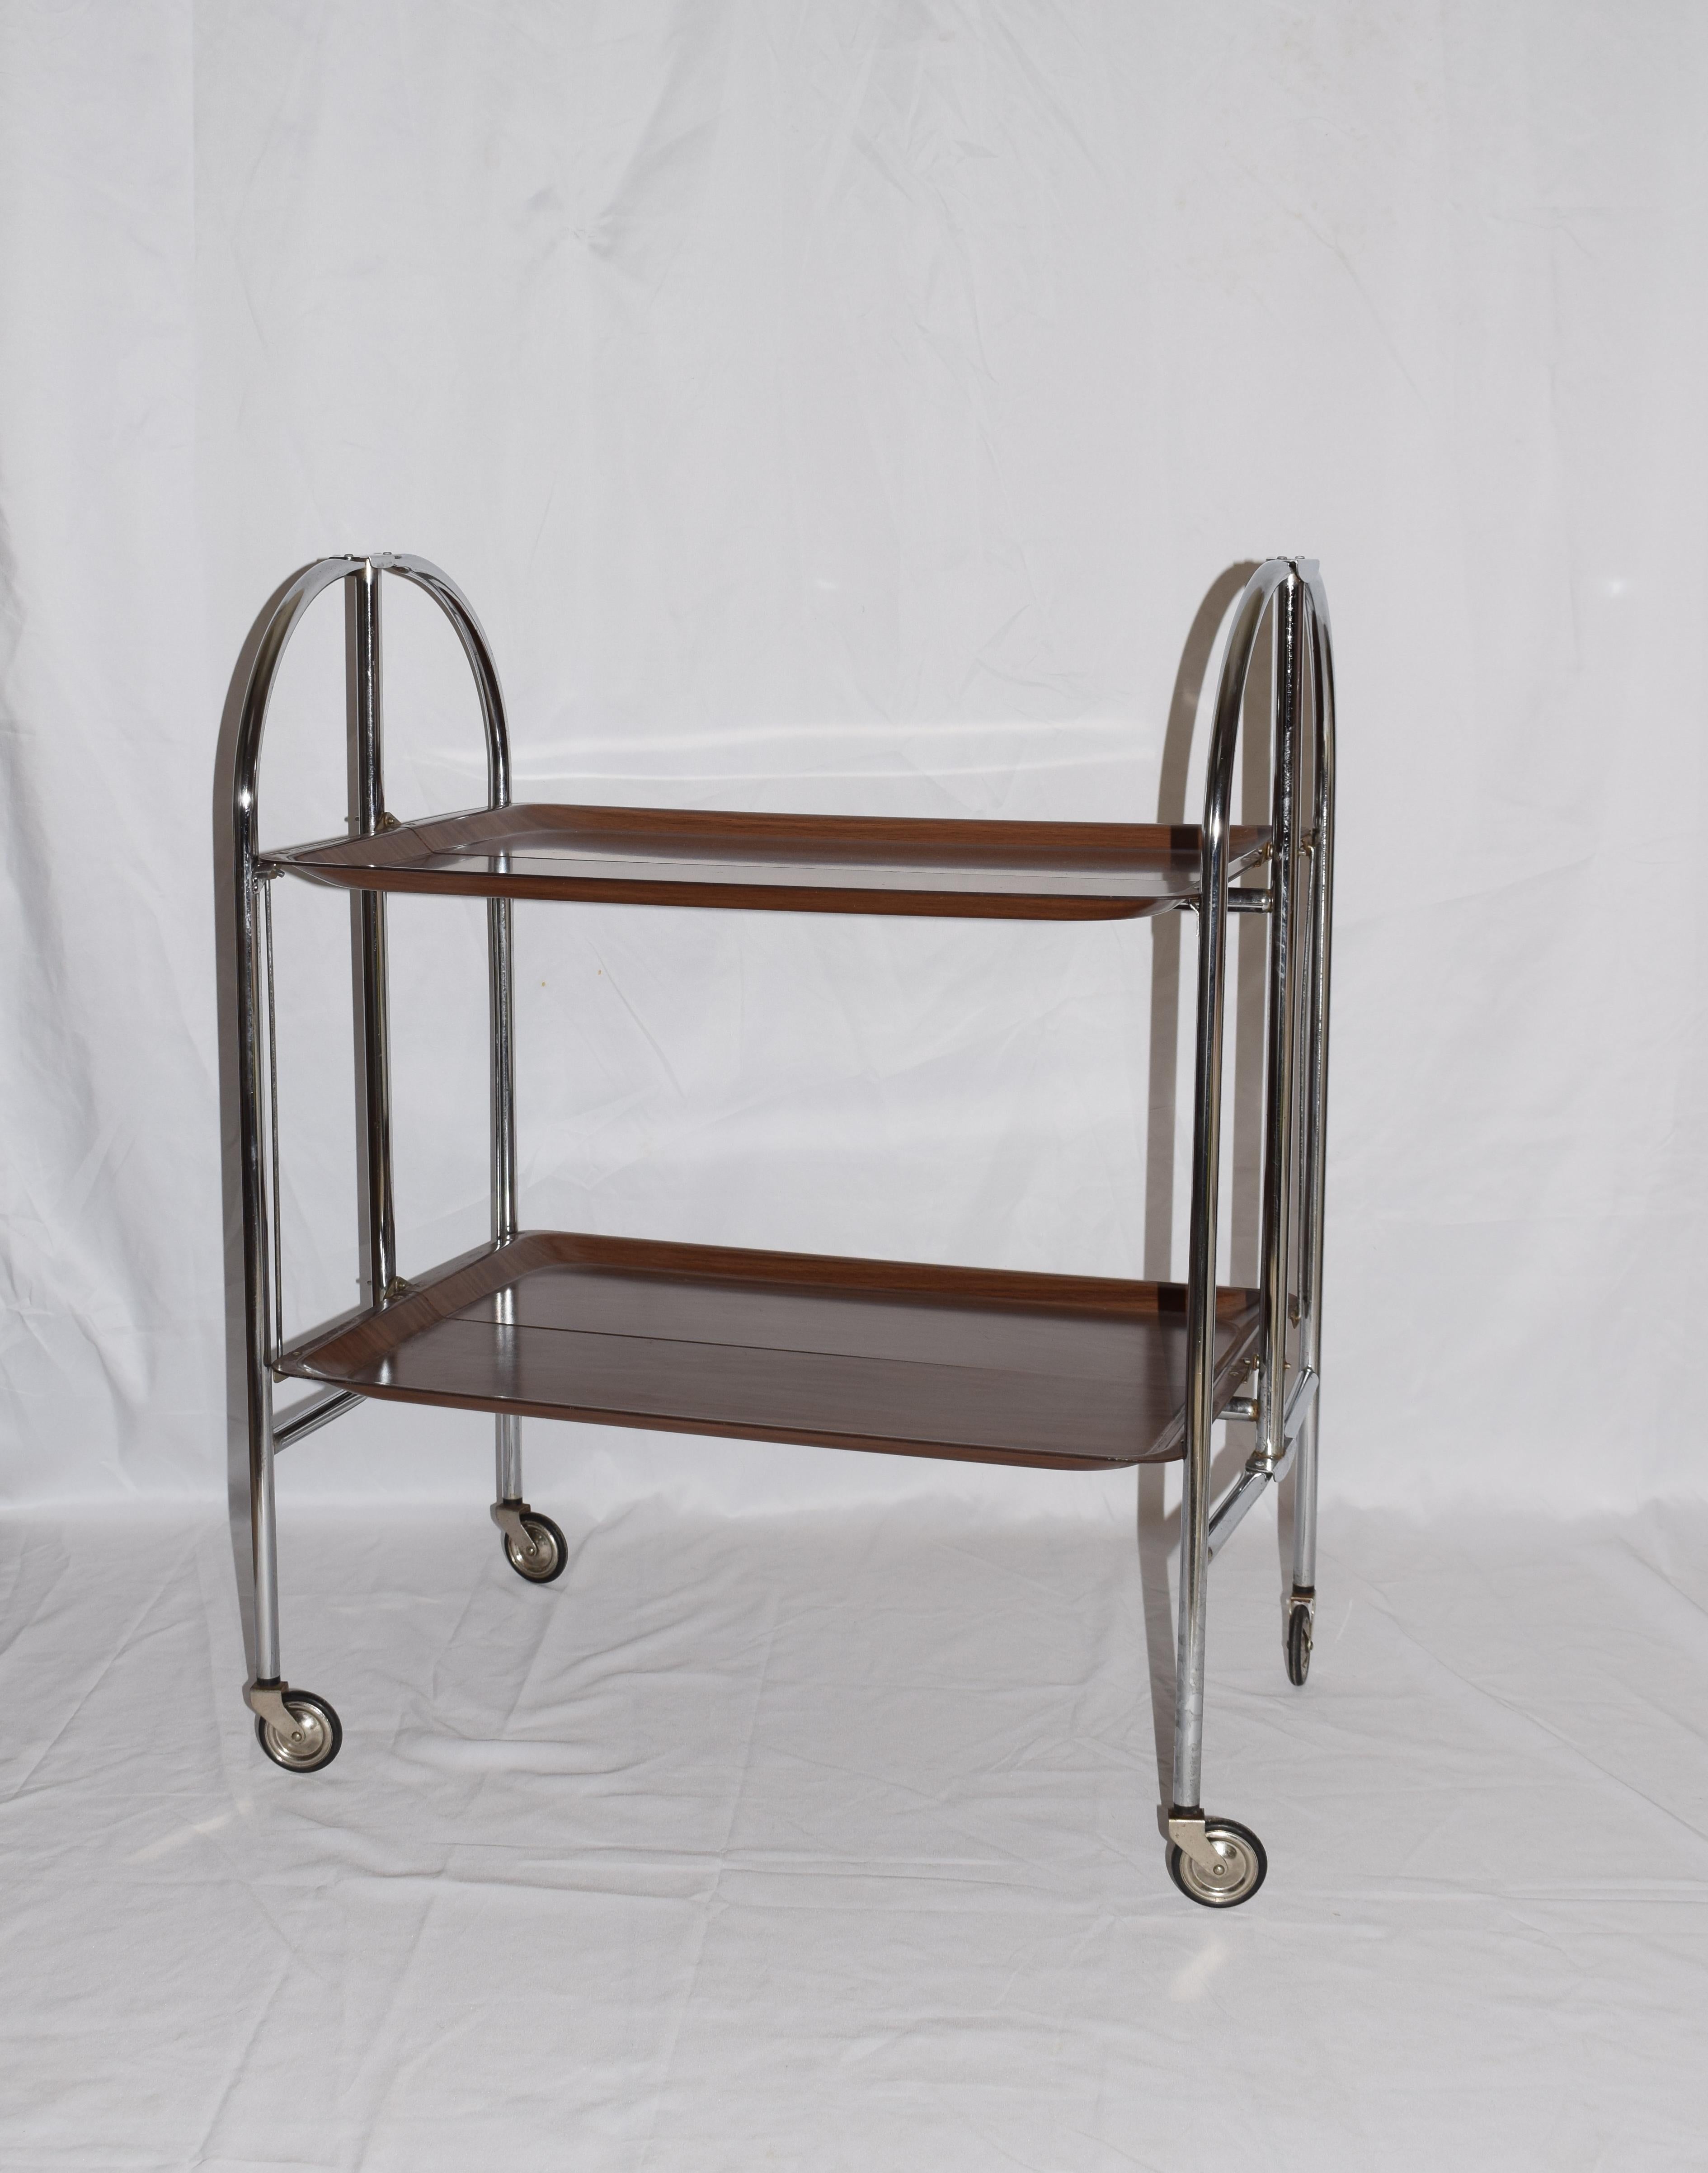 German Mid-Century Bremshey & Co Dinette Trolley circa 1950s